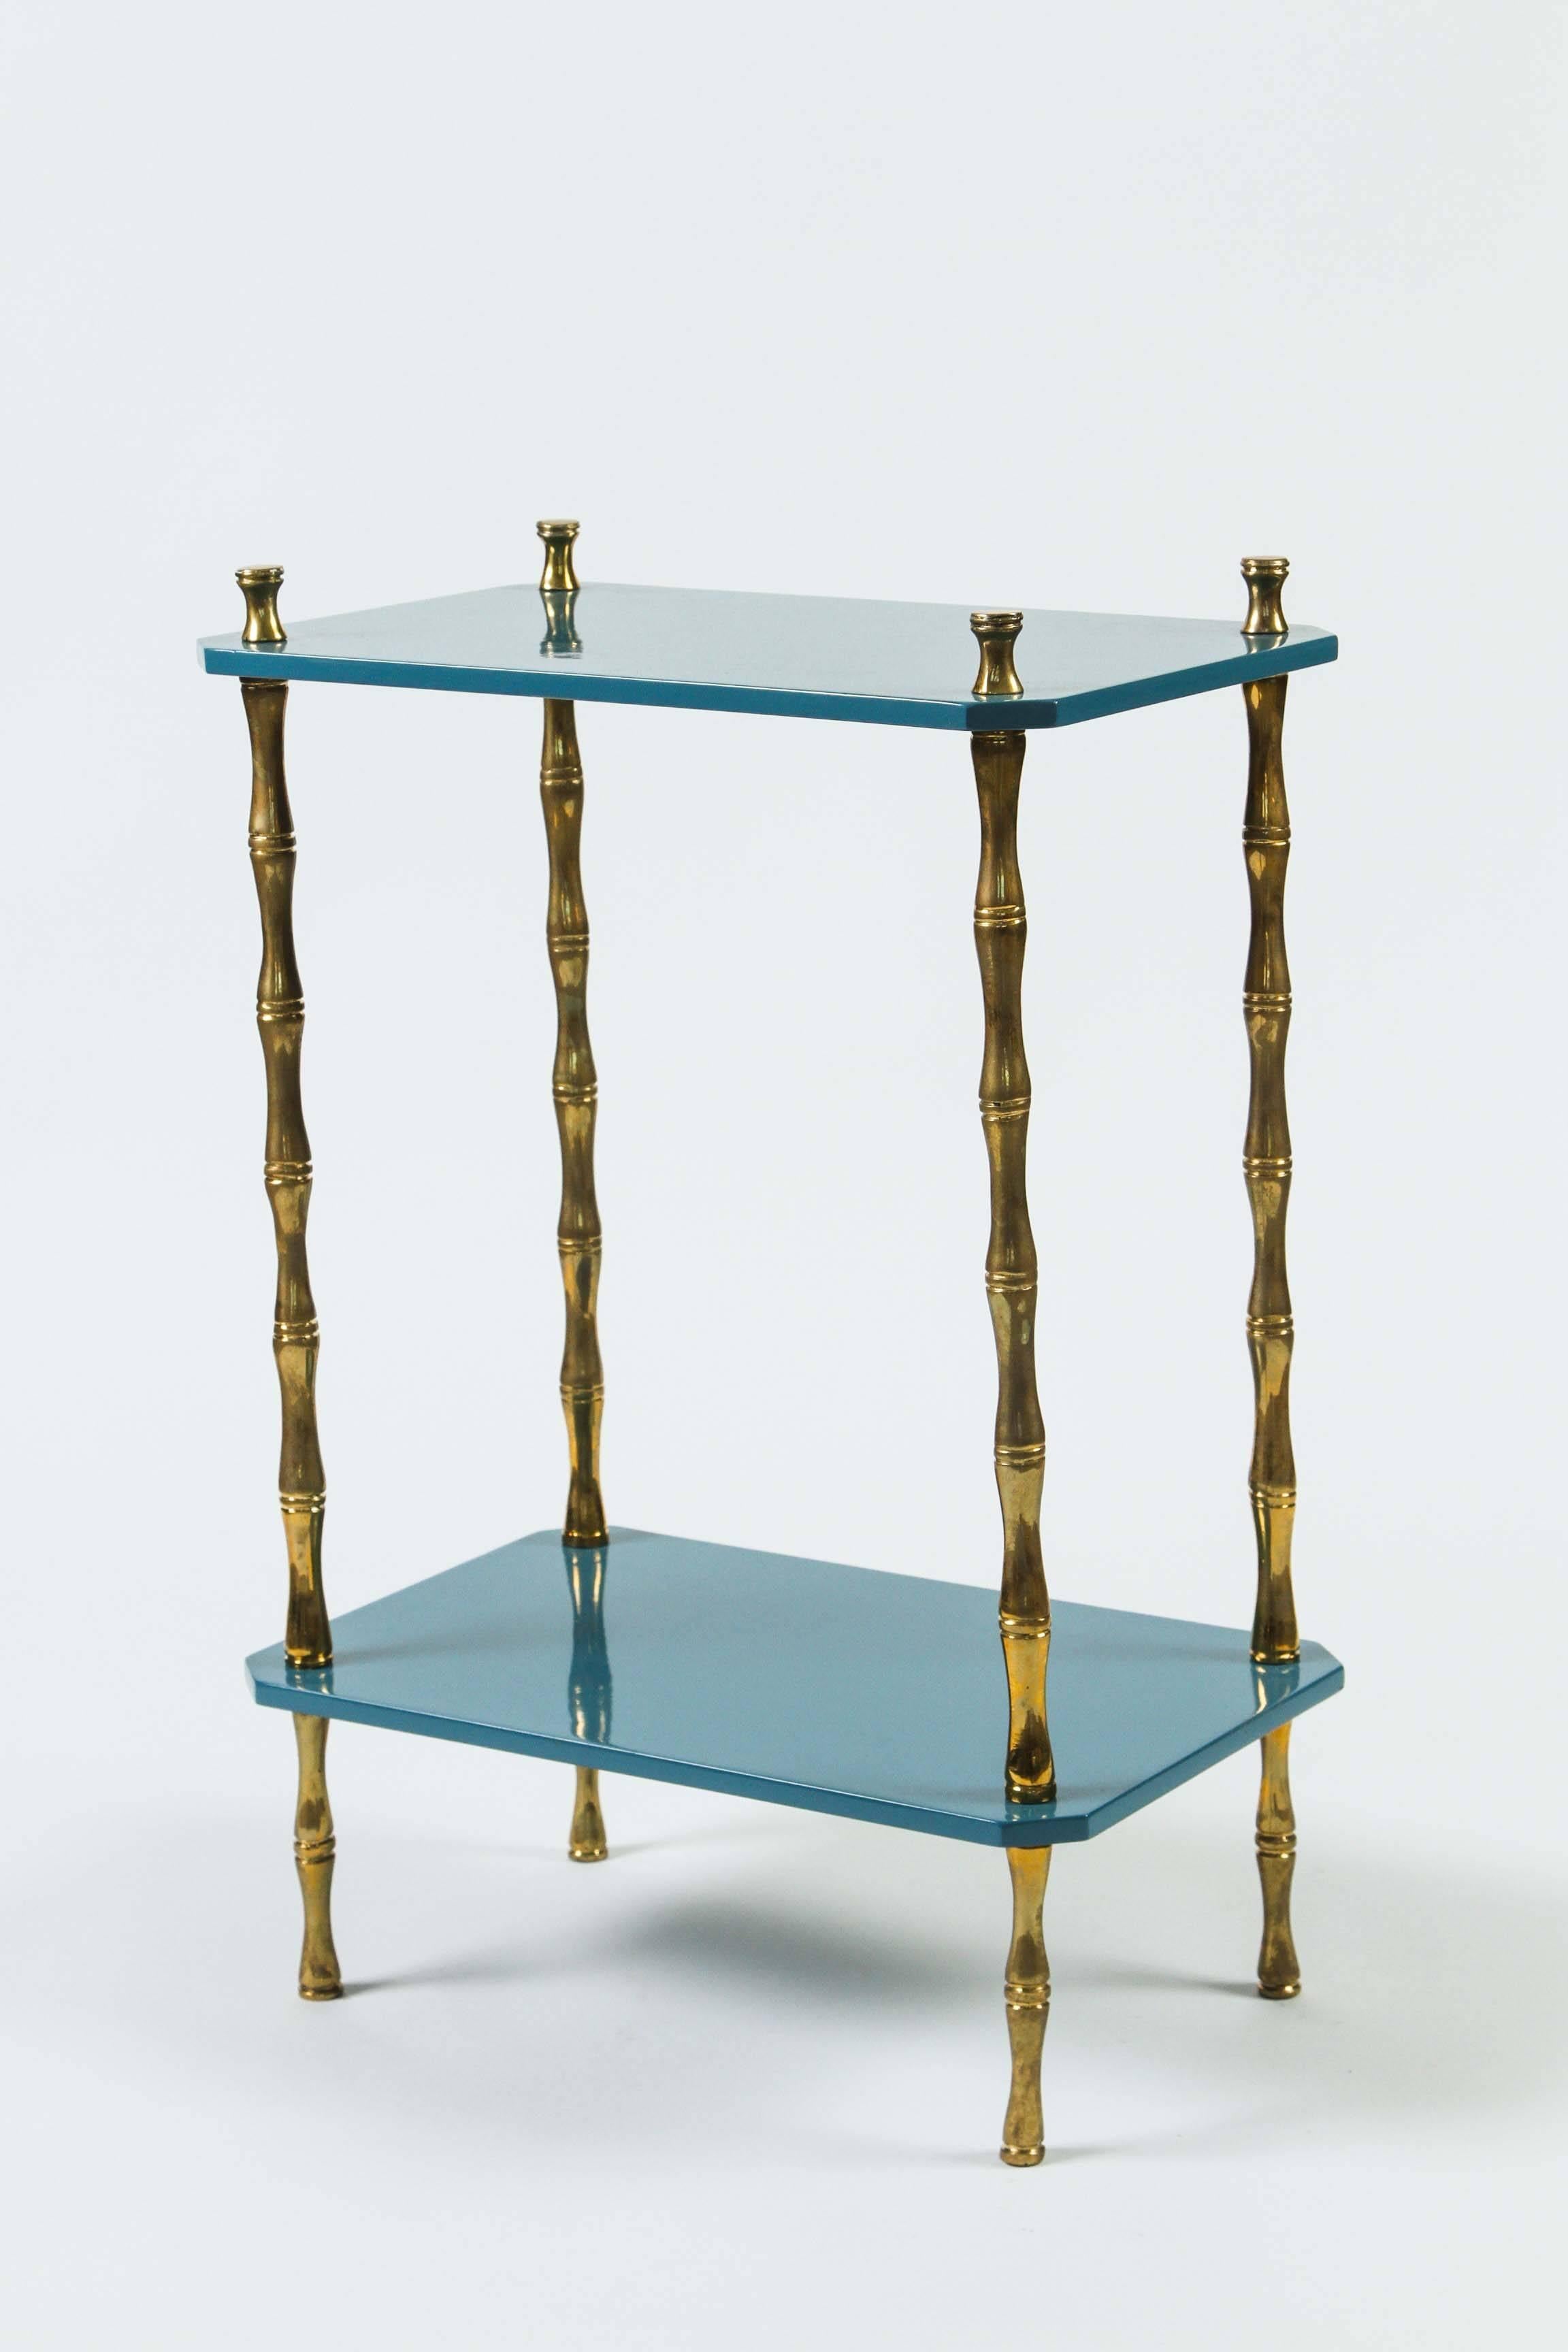 Hollyhock "Freddie" drinks table in teal blue with brass bamboo legs. Also available in oxblood and leaf green.